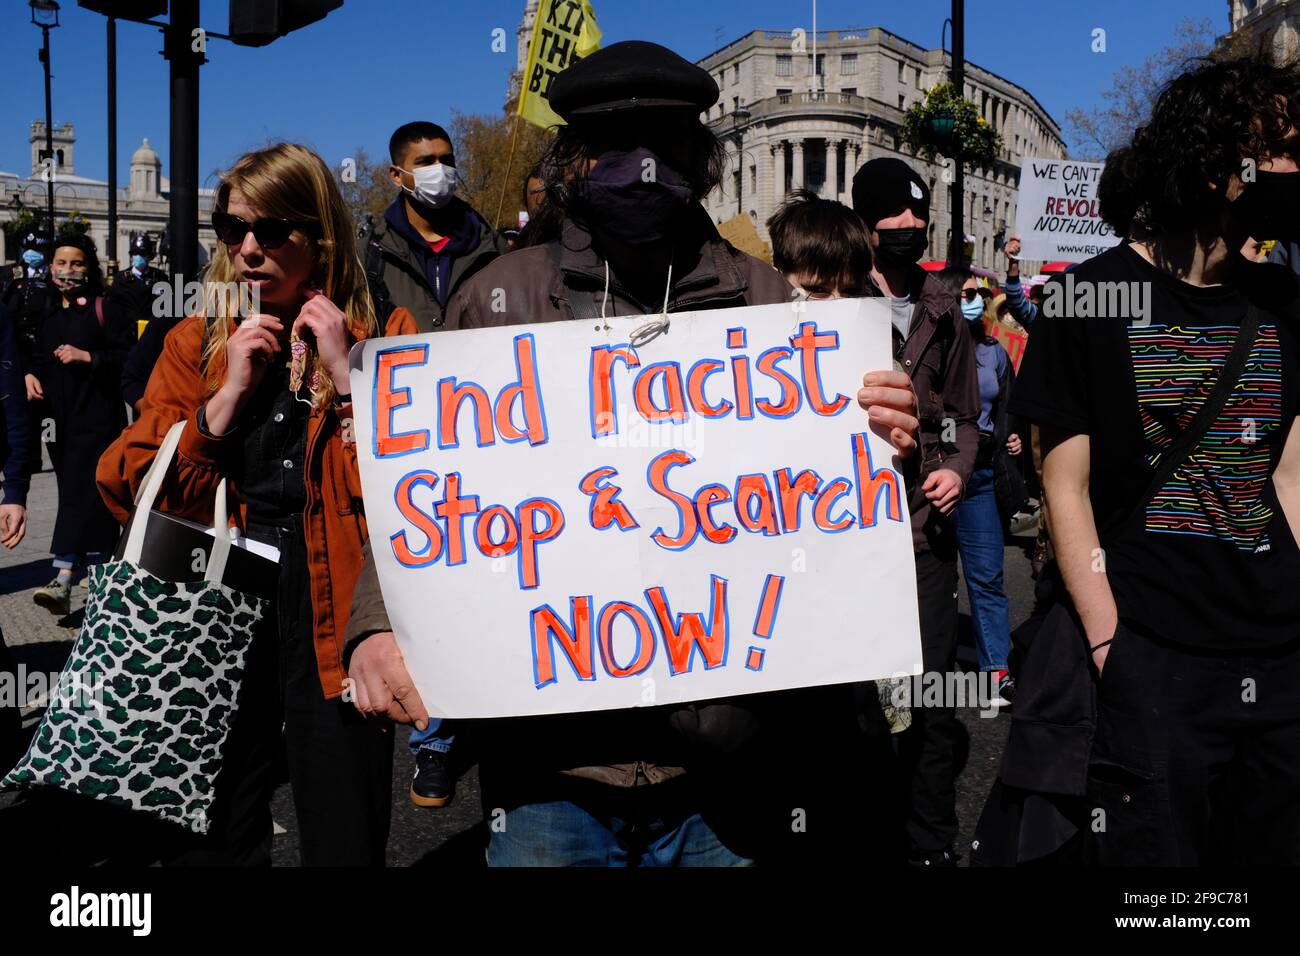 London, England. 17th Apr 2021. Kill the Bill protest against the newly proposed Police, Crime, Sentencing and Courts Bill that the government are trying to pass.  A protester holds up a sign that says 'End Racist Stop and Search'. Bradley Stearn / Alamy Live News Stock Photo